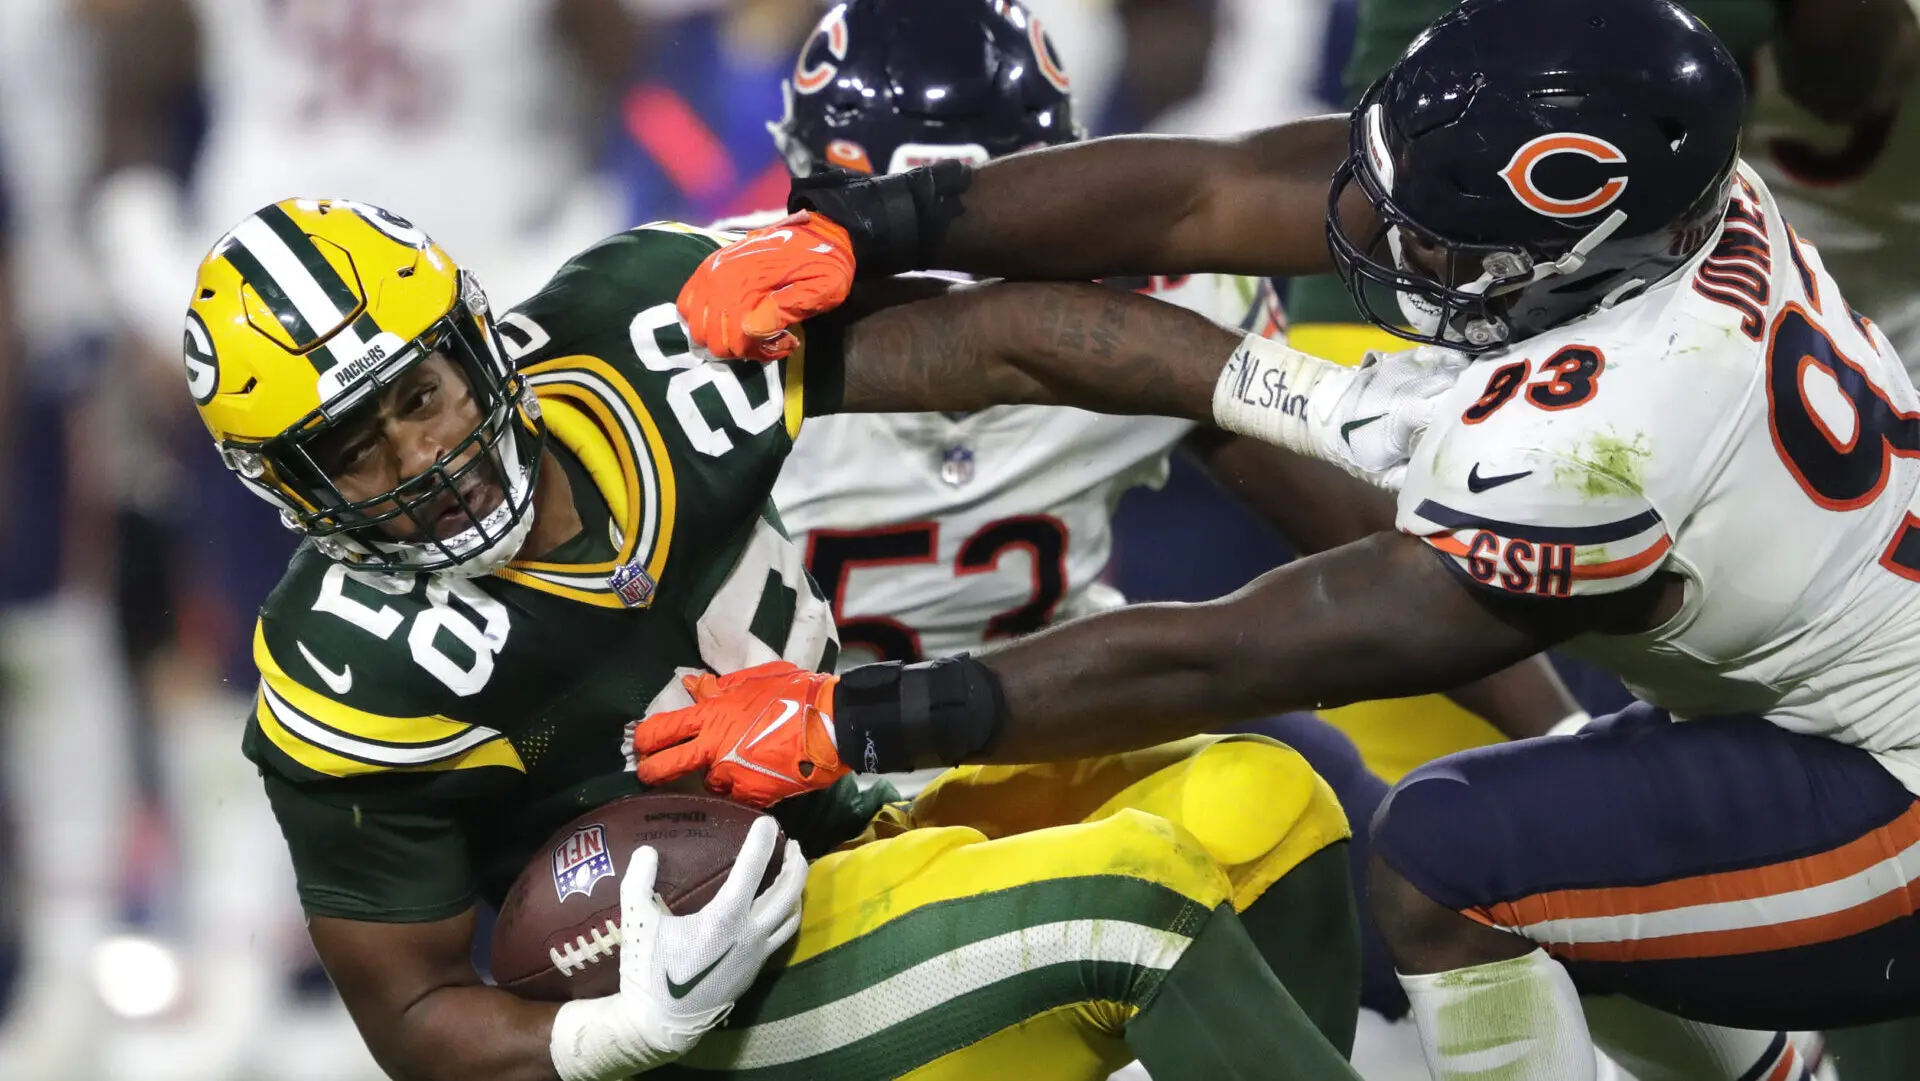 Twitter reacts to Bears in 3rd-and-40 situation against Packers